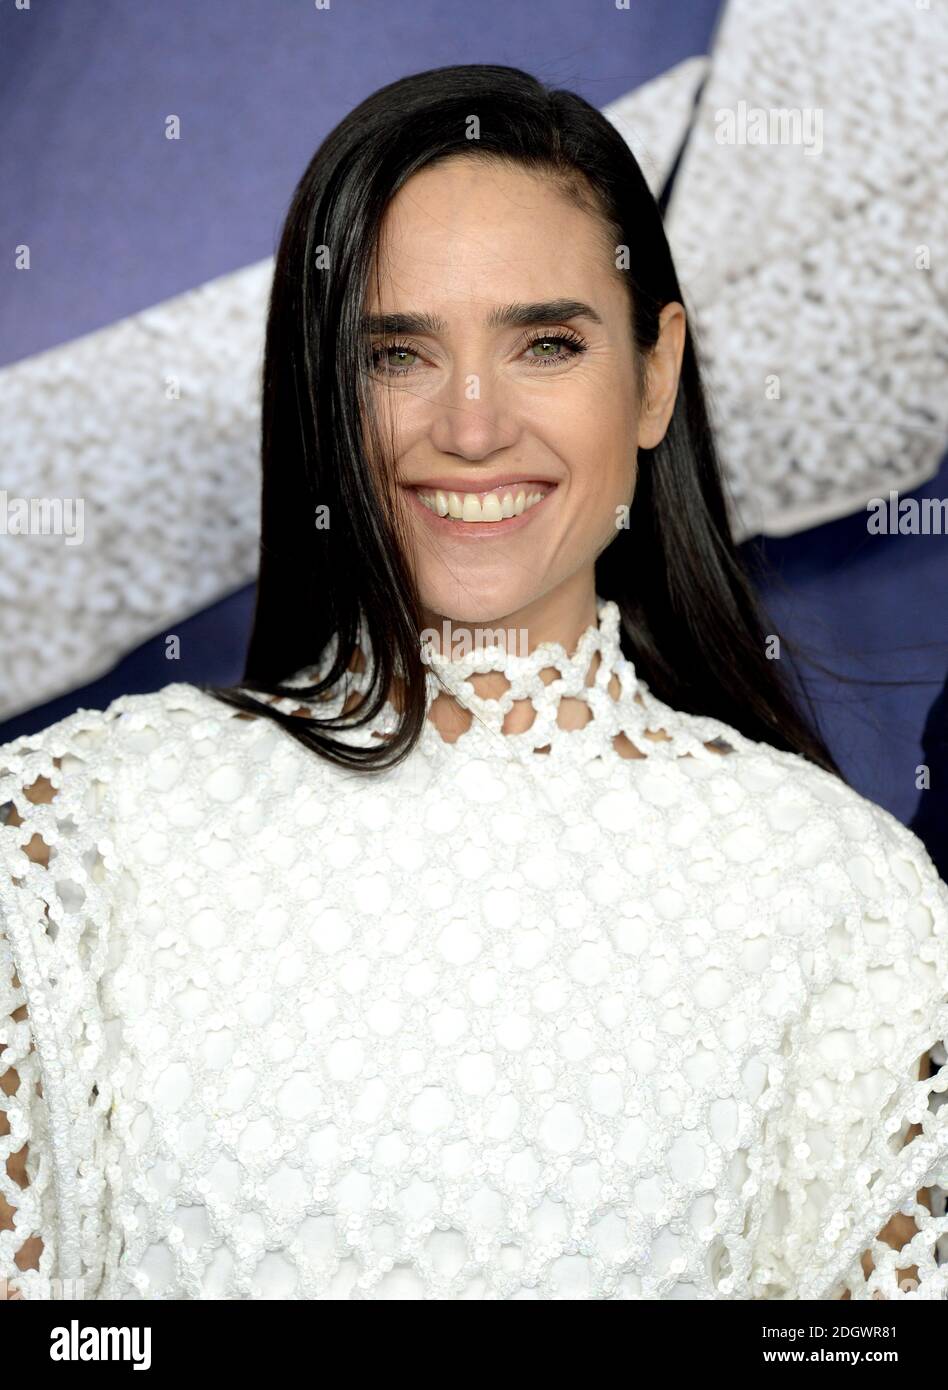 Jennifer Connelly attending the world premiere of Alita: Battle Angel, held at the Odeon Leicester Square in London Stock Photo